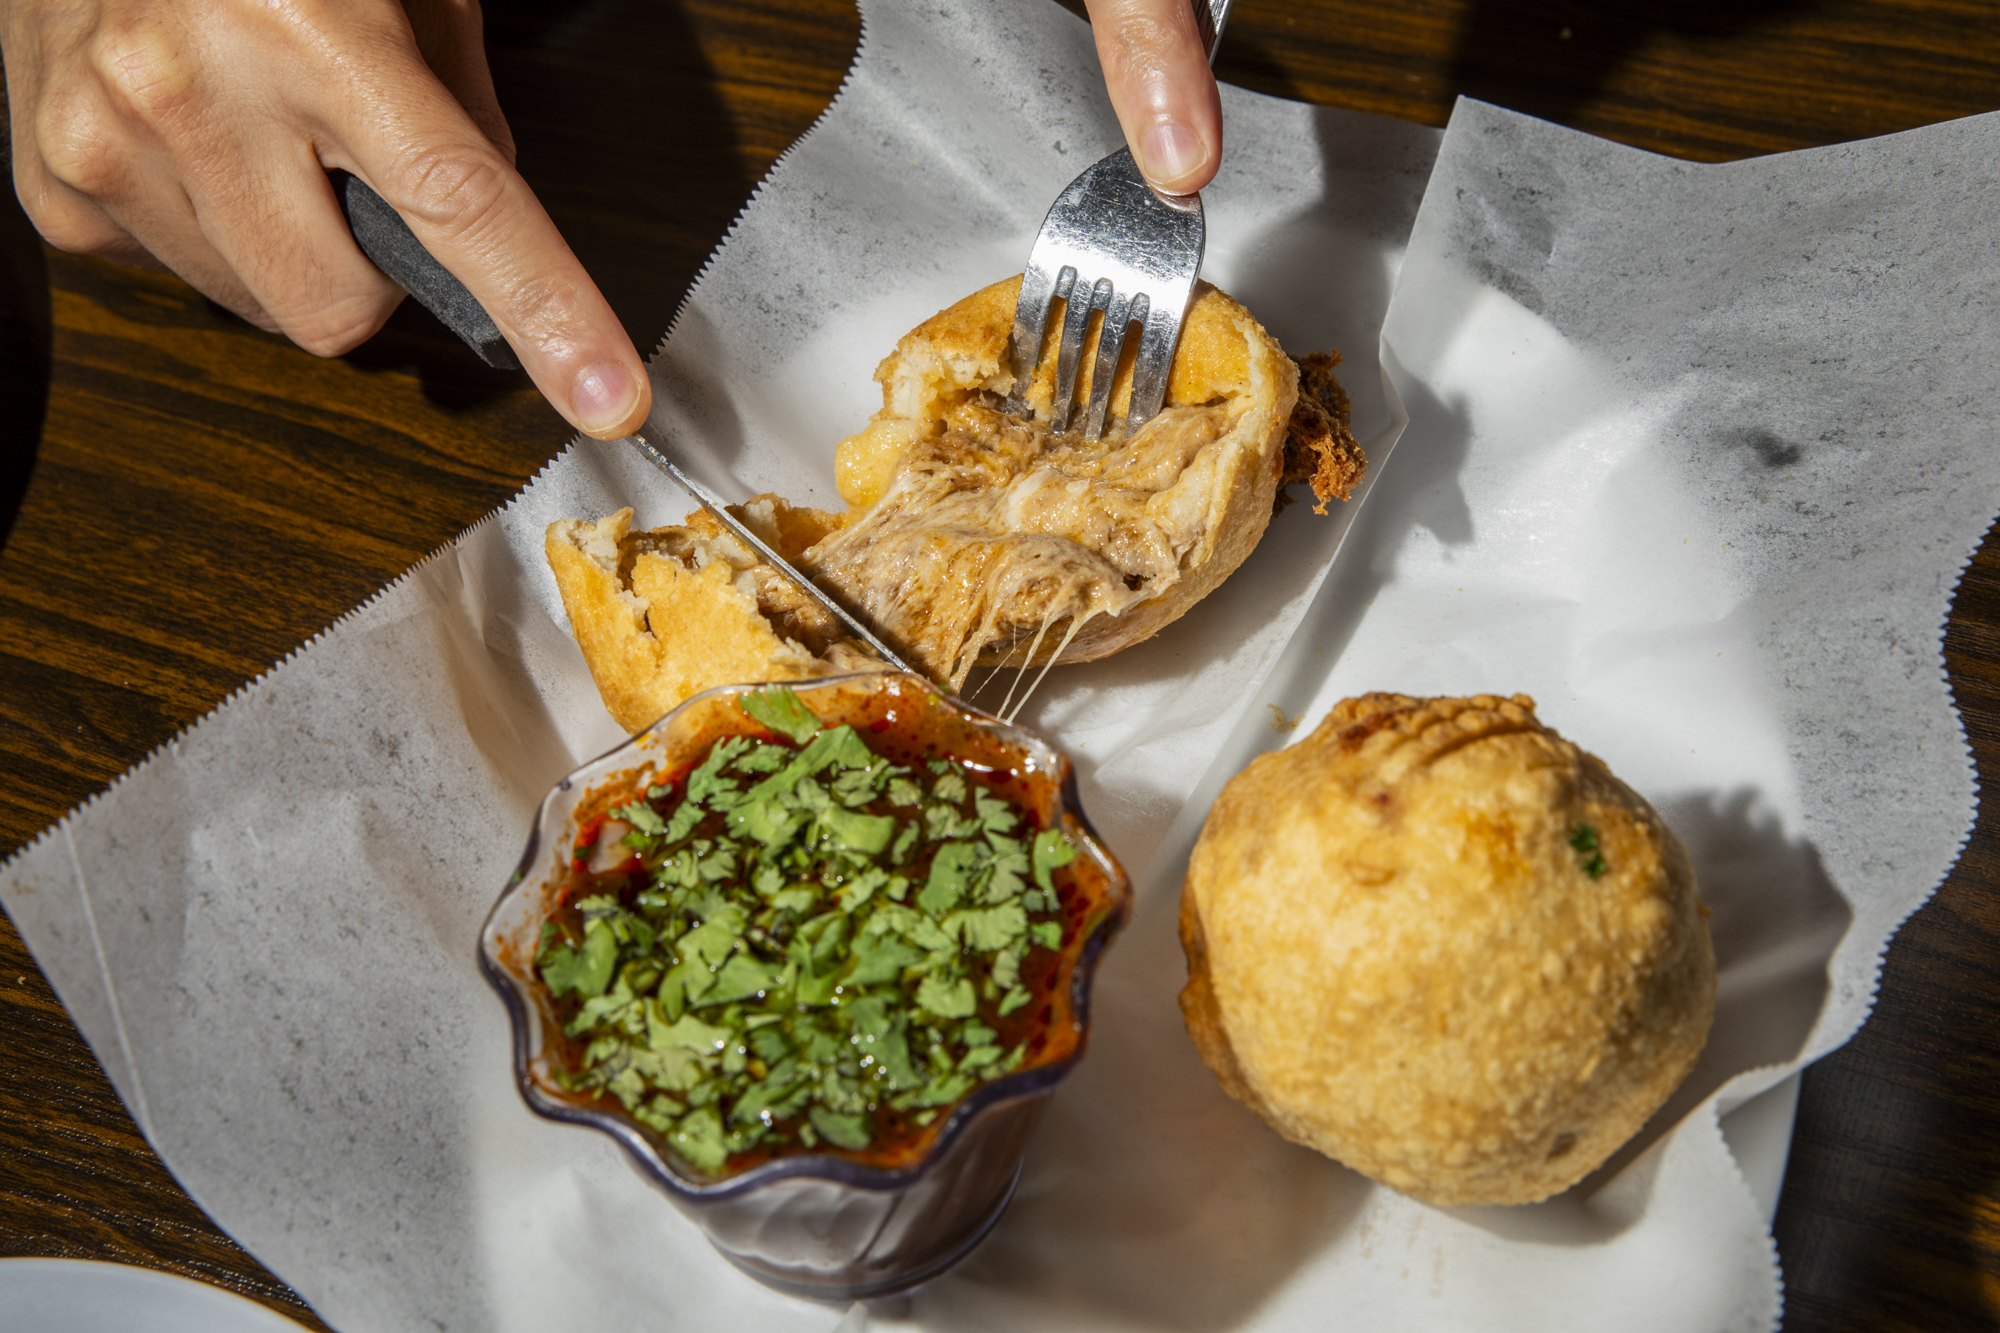 A fork and knife cut into a filled fried-looking ball.